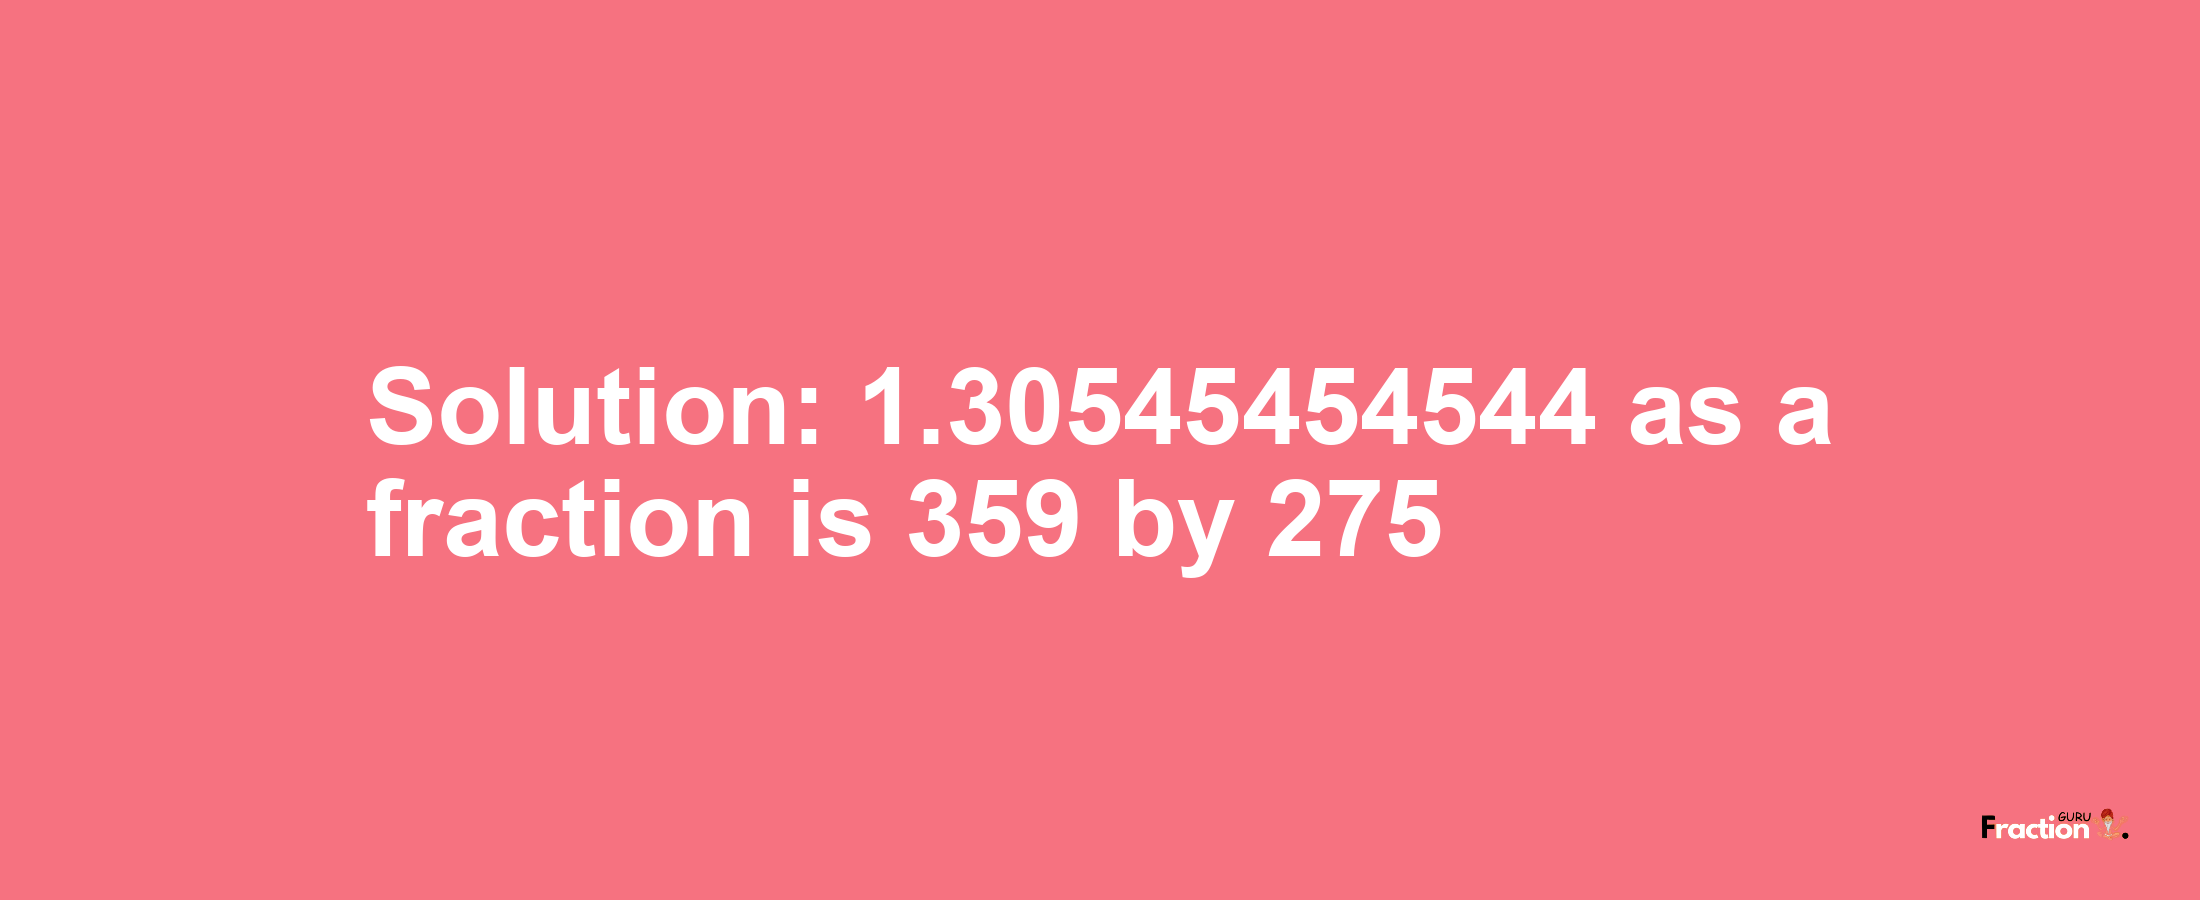 Solution:1.30545454544 as a fraction is 359/275